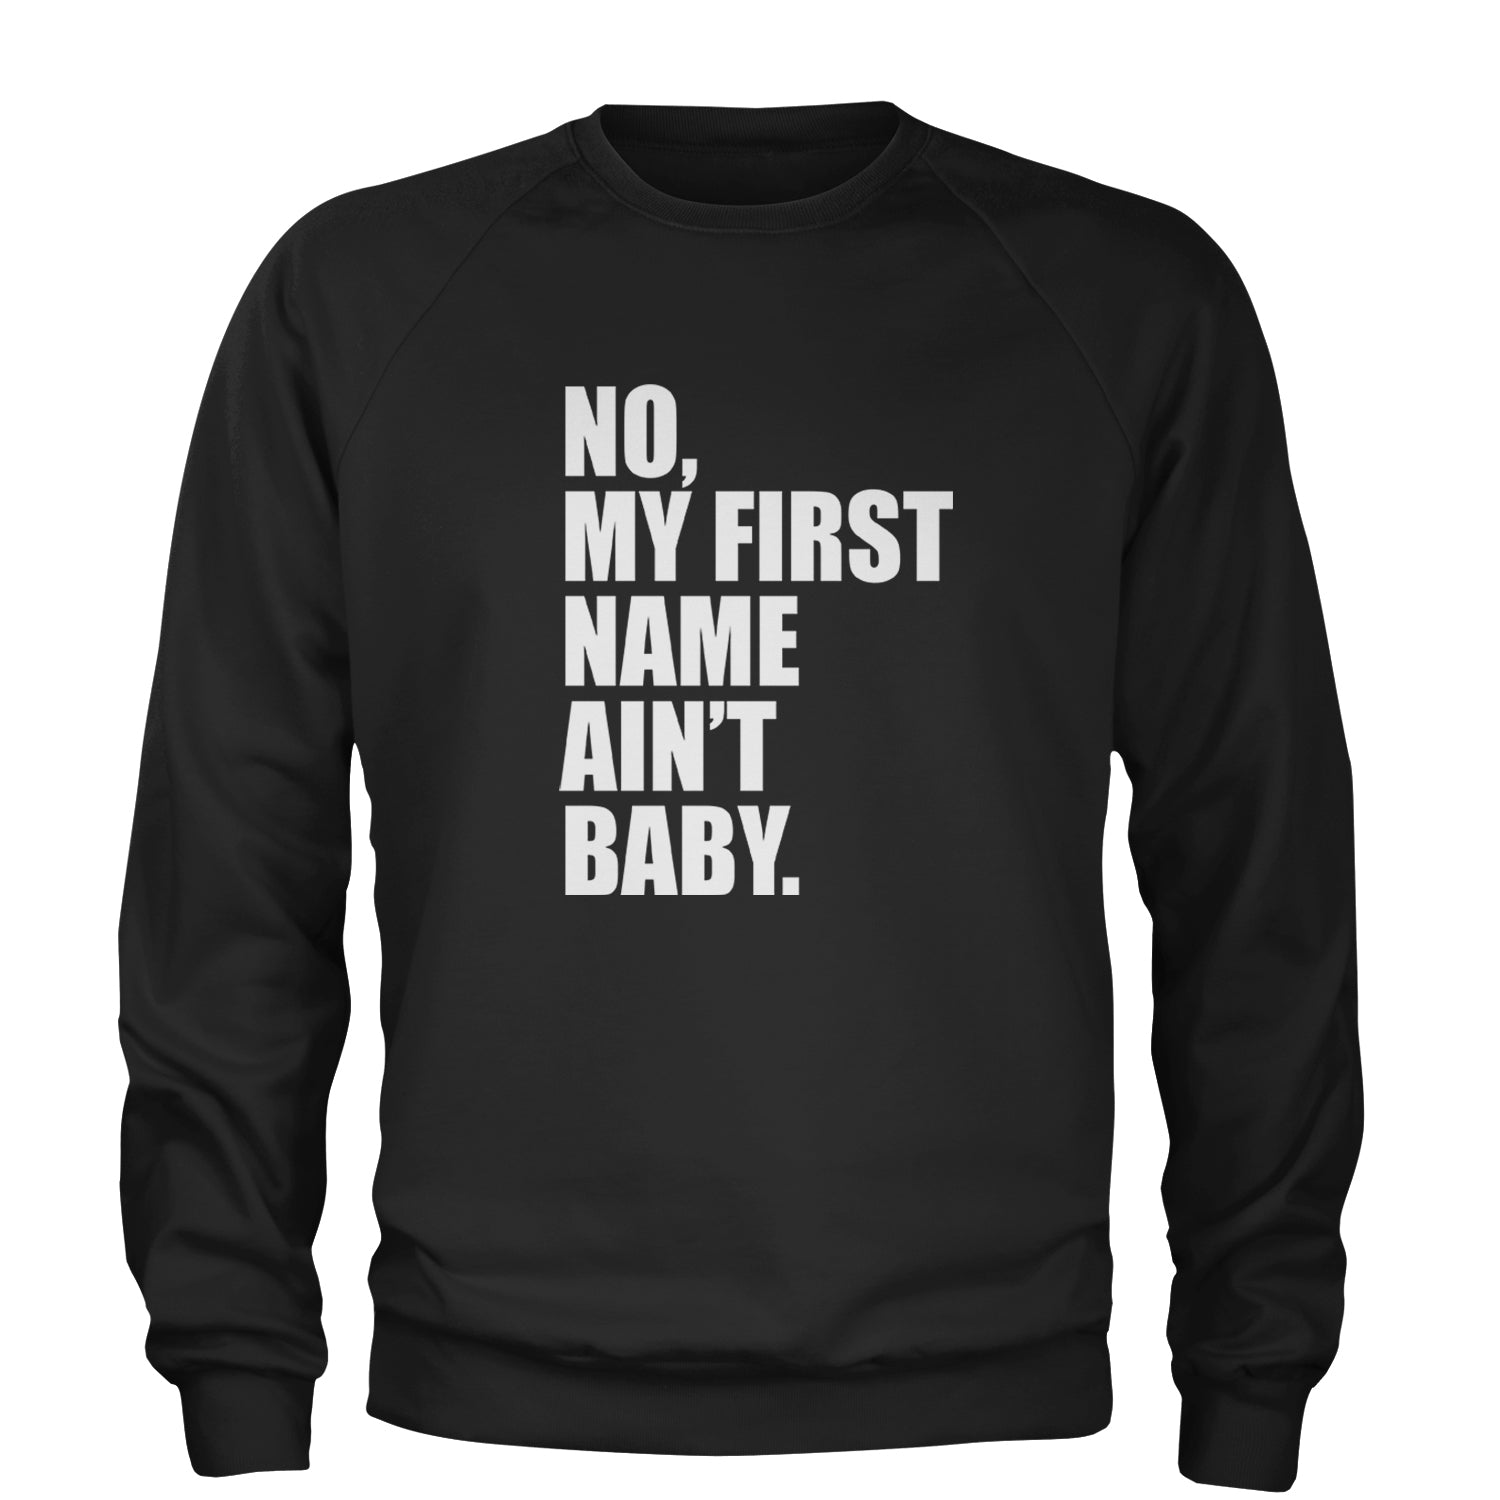 No My First Name Ain't Baby Together Again Adult Crewneck Sweatshirt